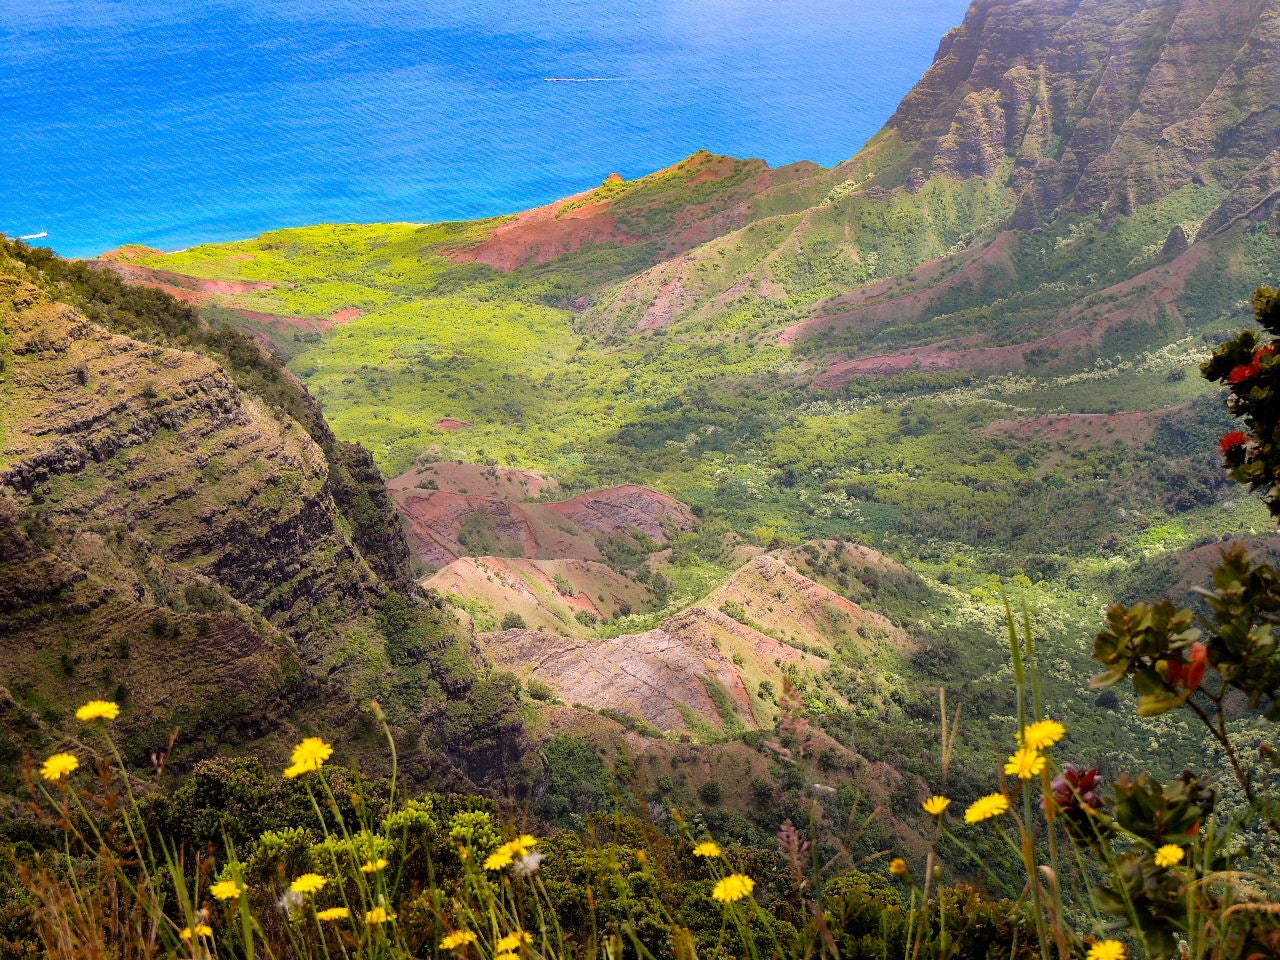 why to visit hawaii